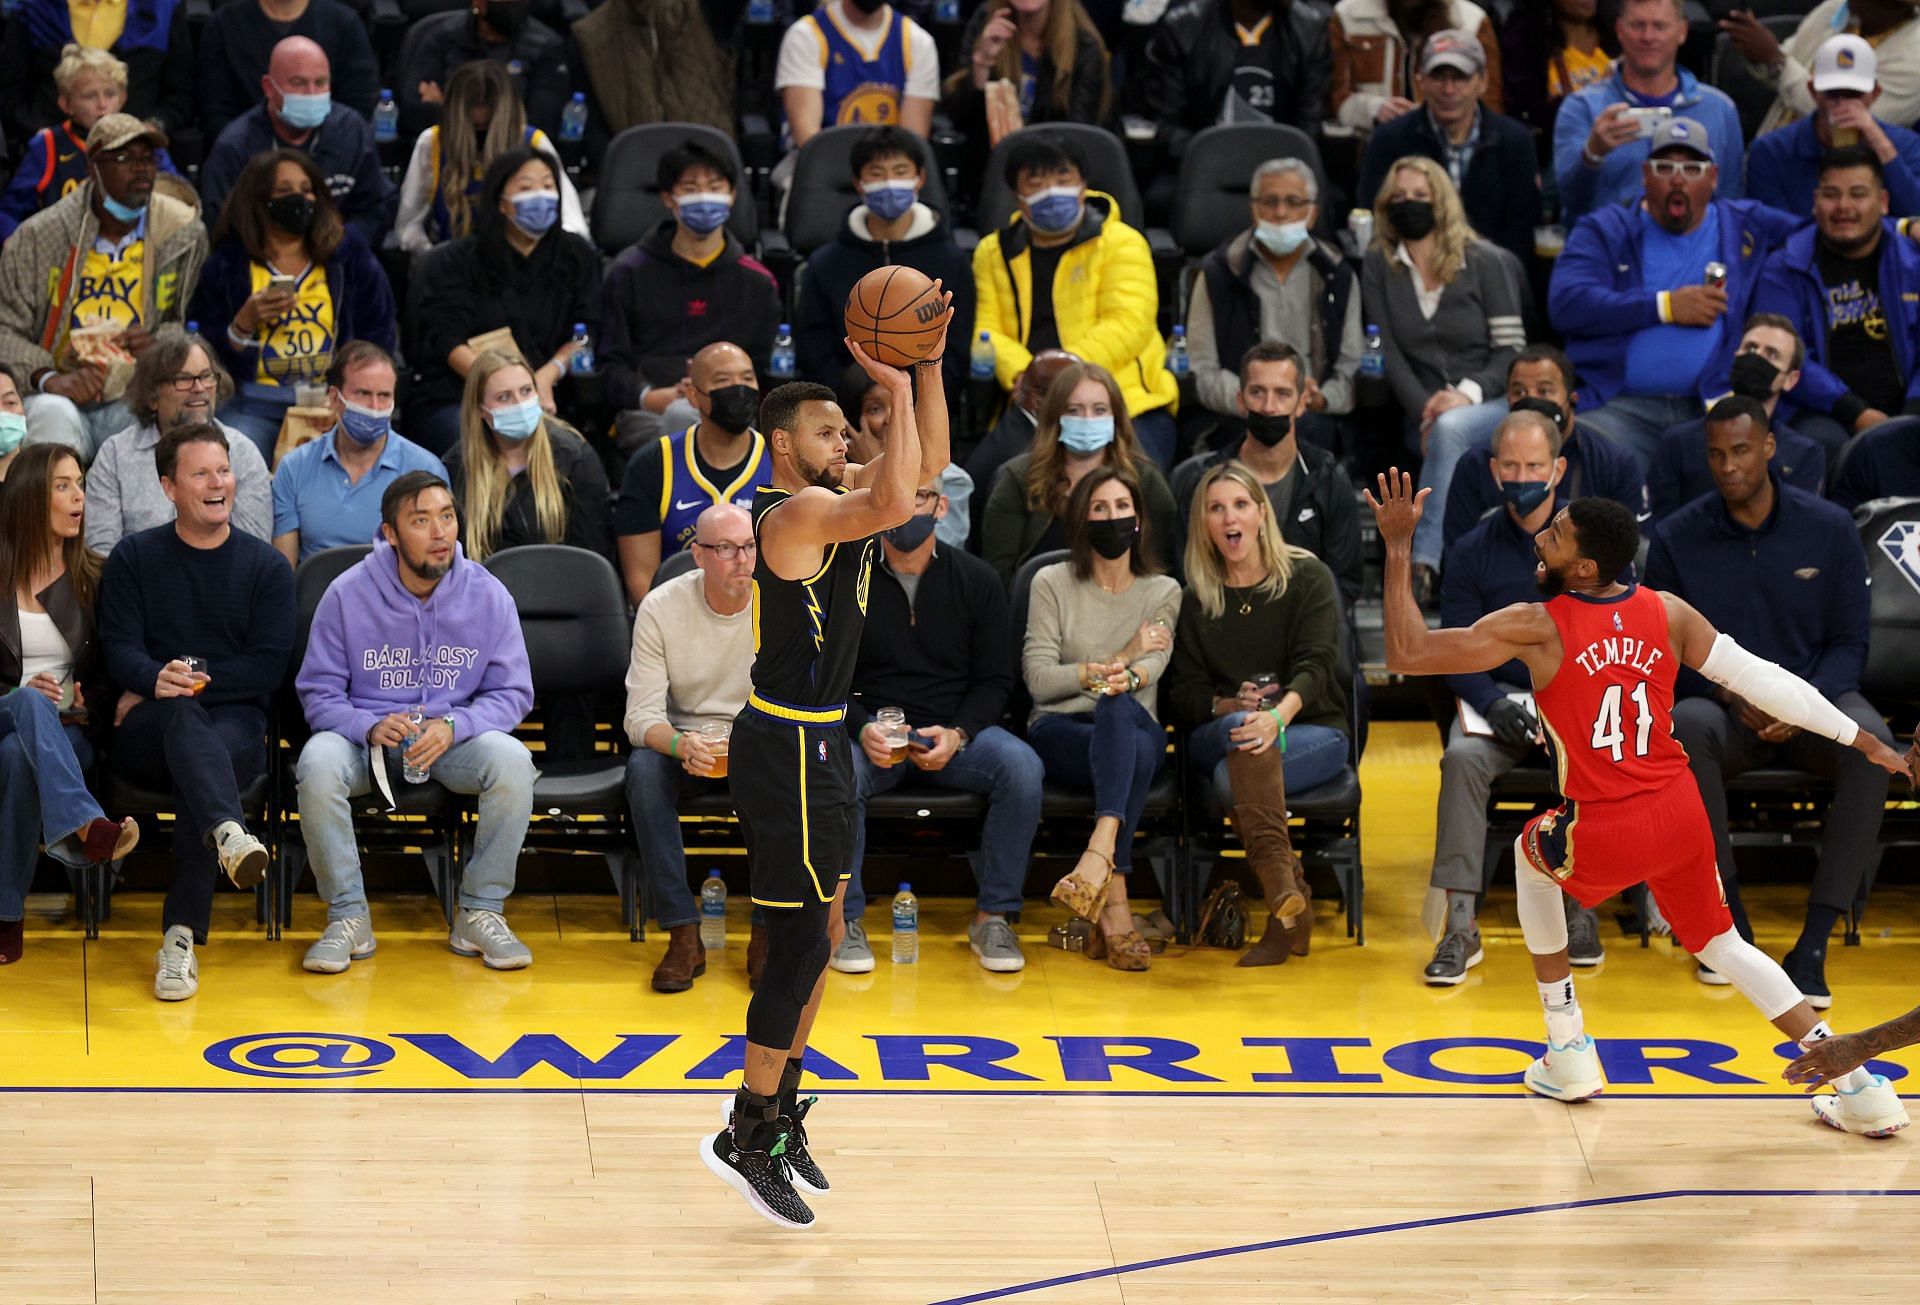 Stephen Curry #30 of the Golden State Warriors shoots a three -point basket over Garrett Temple #41 of the New Orleans Pelicans at Chase Center on November 05, 2021 in San Francisco, California.